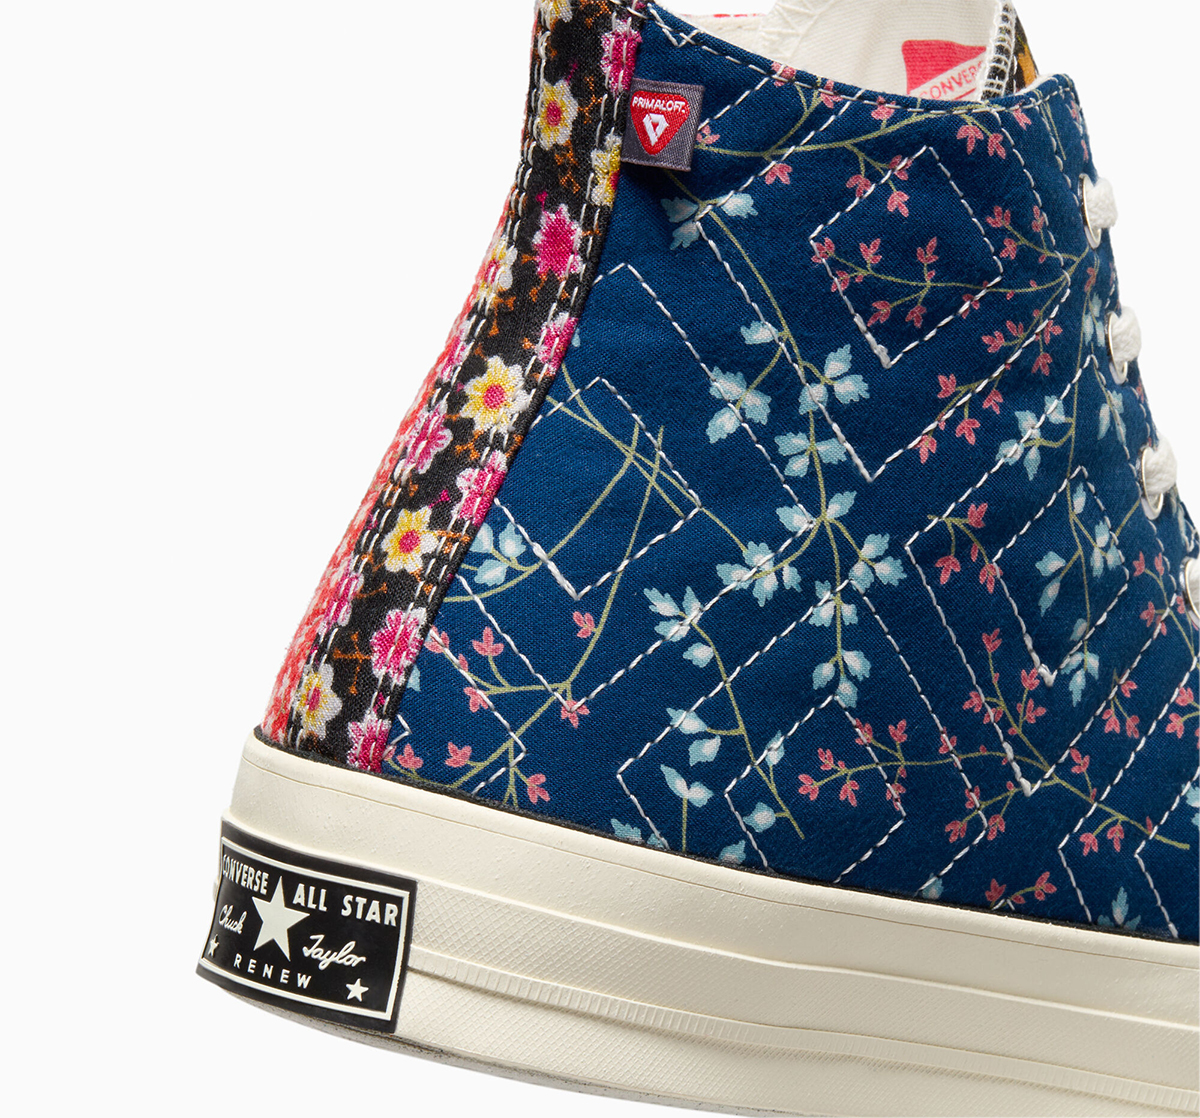 Vince Staples x texture Converse Chuck Taylor Big Fish Theory Upcycled Floral A04617c 5